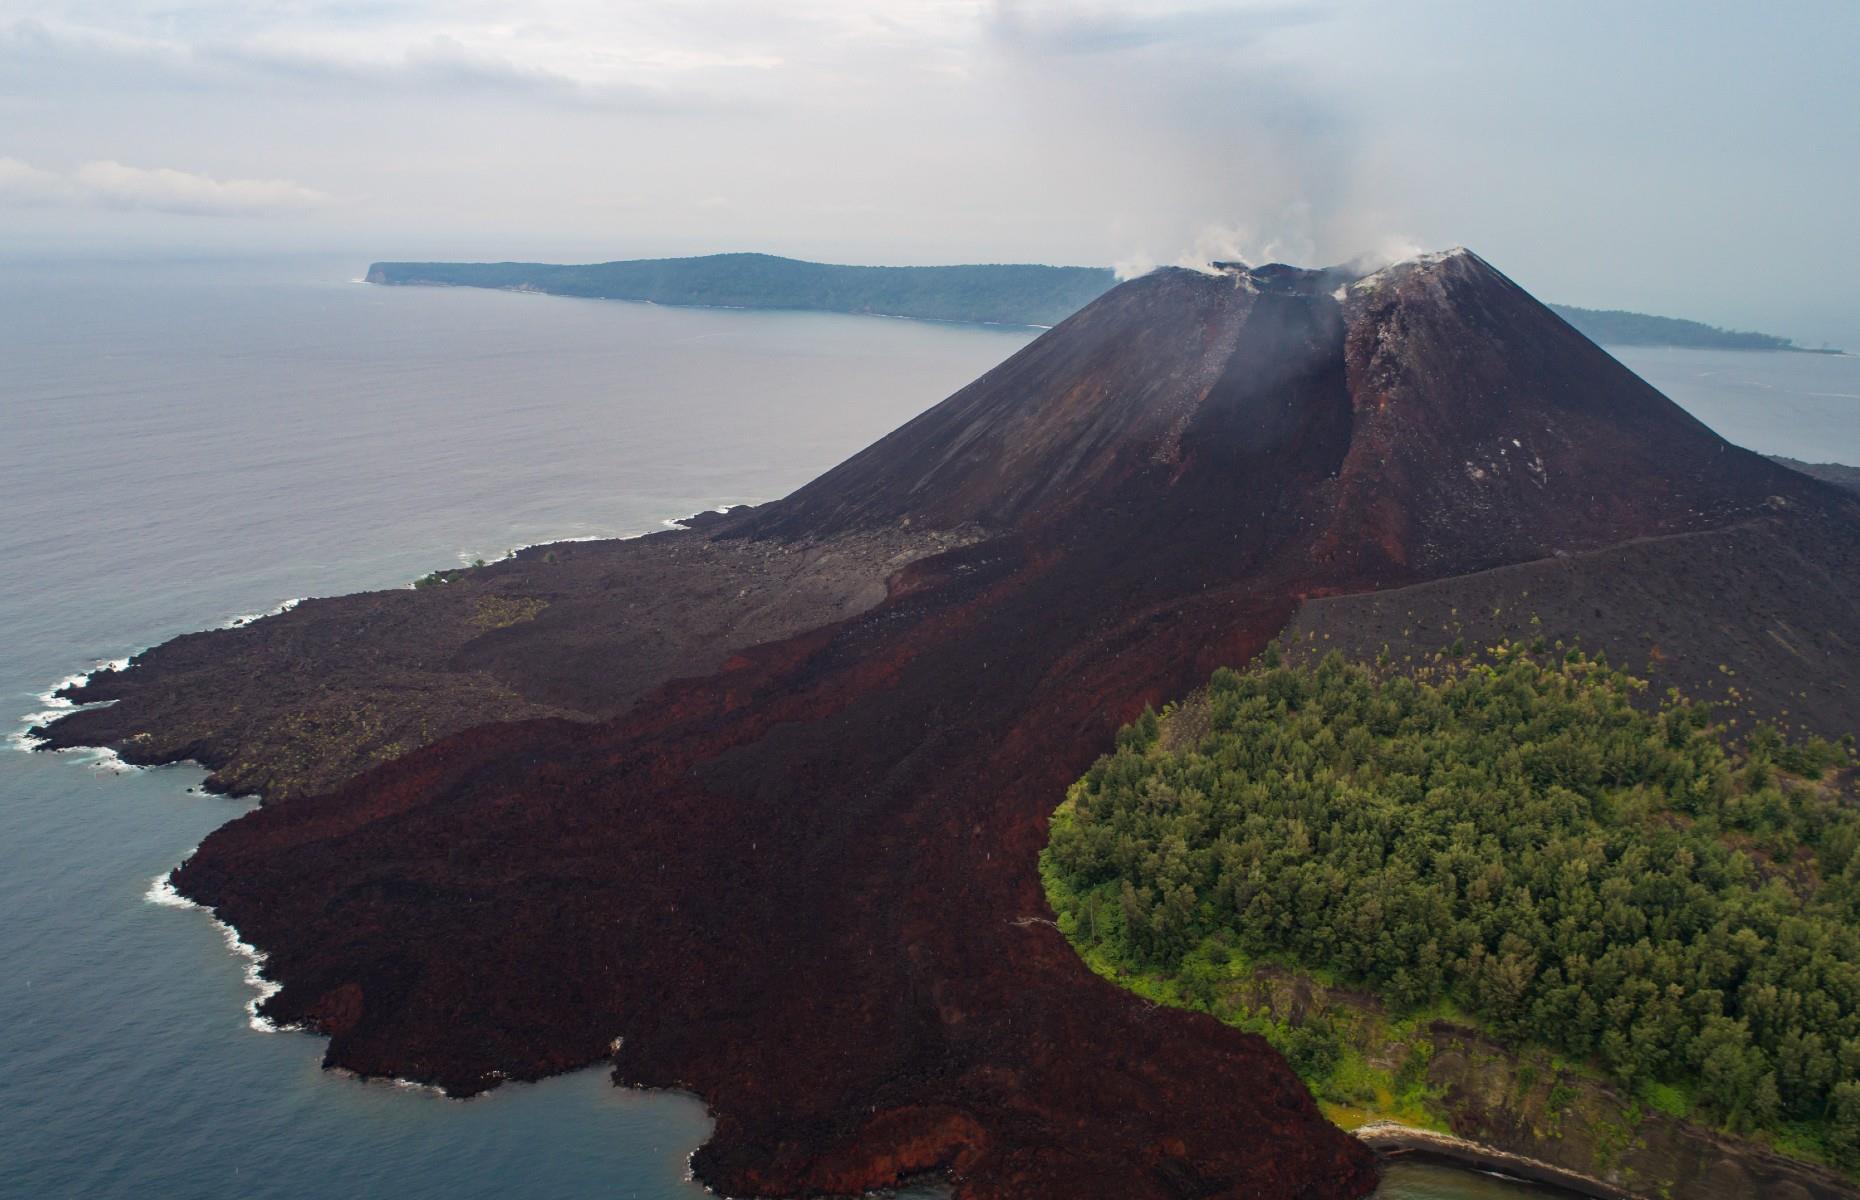 One of the biggest volcanic eruptions in recorded history happened in 1883 in the Sunda Strait between the islands of Java and Sumatra. The island of Krakatoa was destroyed and an ash cloud entered the atmosphere and circled the world. Anak Krakatoa, meaning the 'child of Krakatoa', is a cinder cone volcano formed inside the original Krakatoa caldera. It only appeared in 1927 and as a young volcano it's of huge interest to scientists.